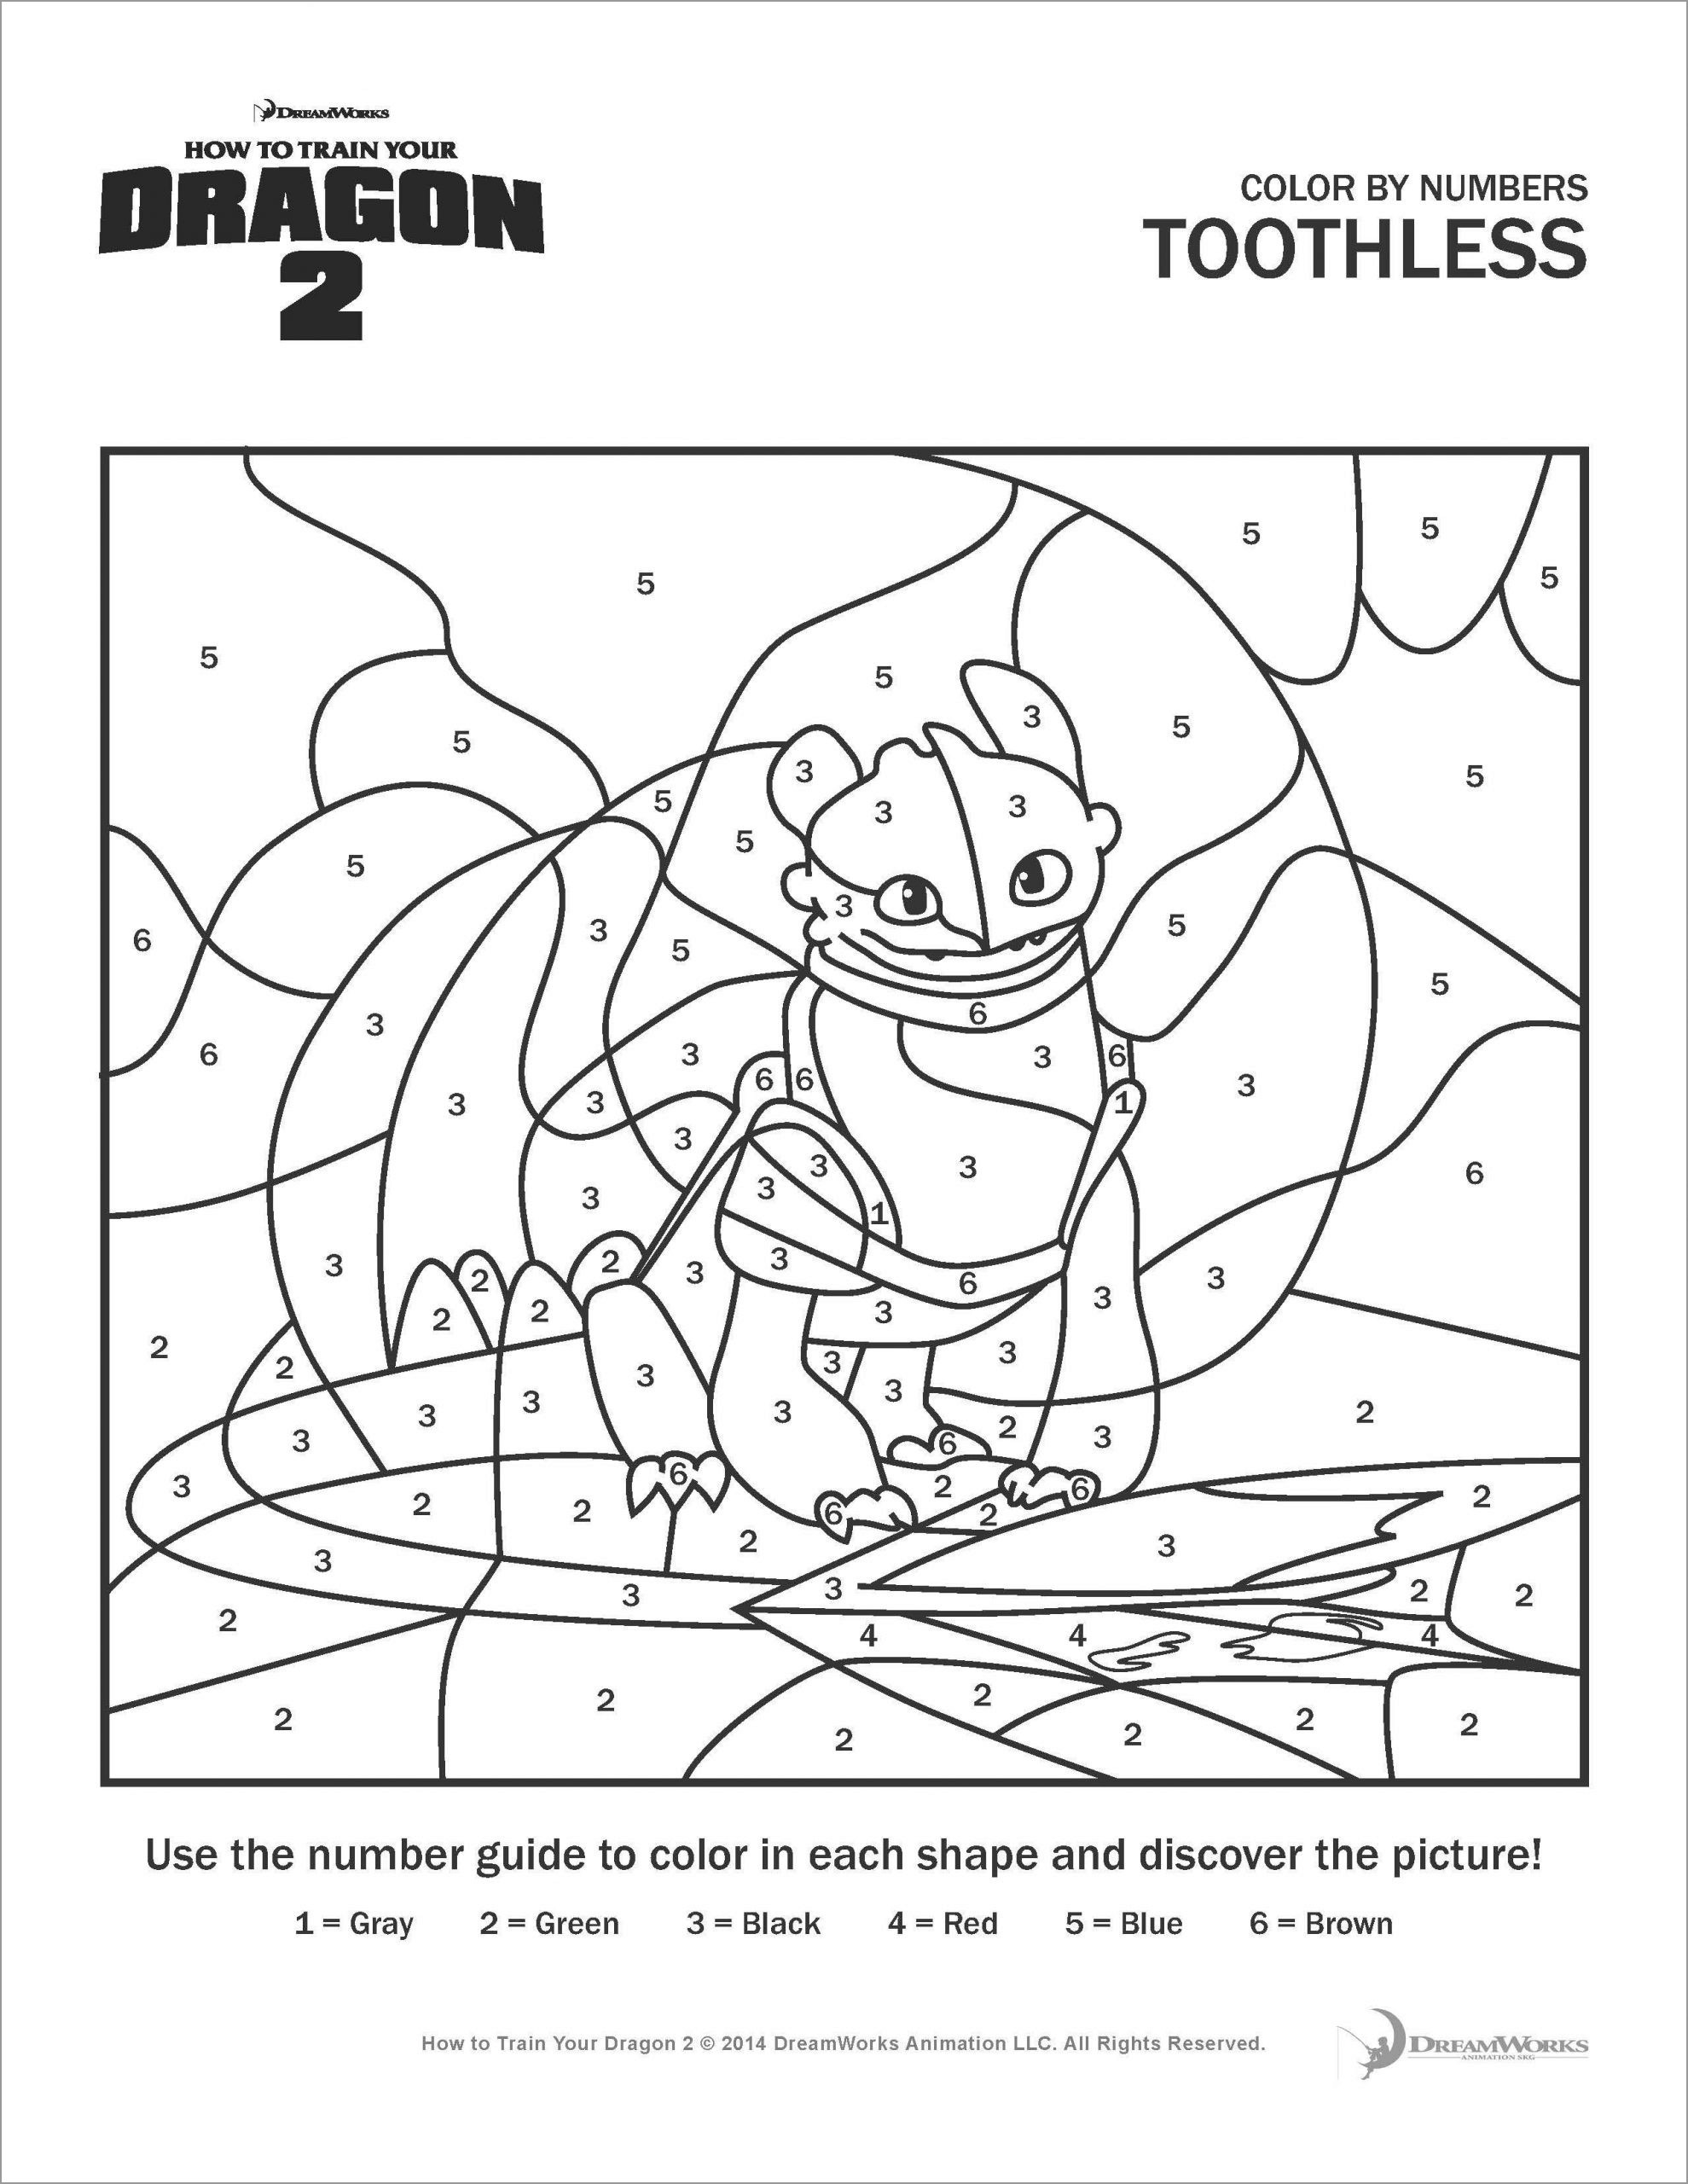 How to Train Your Dragon toothless Color by Number Coloring Page